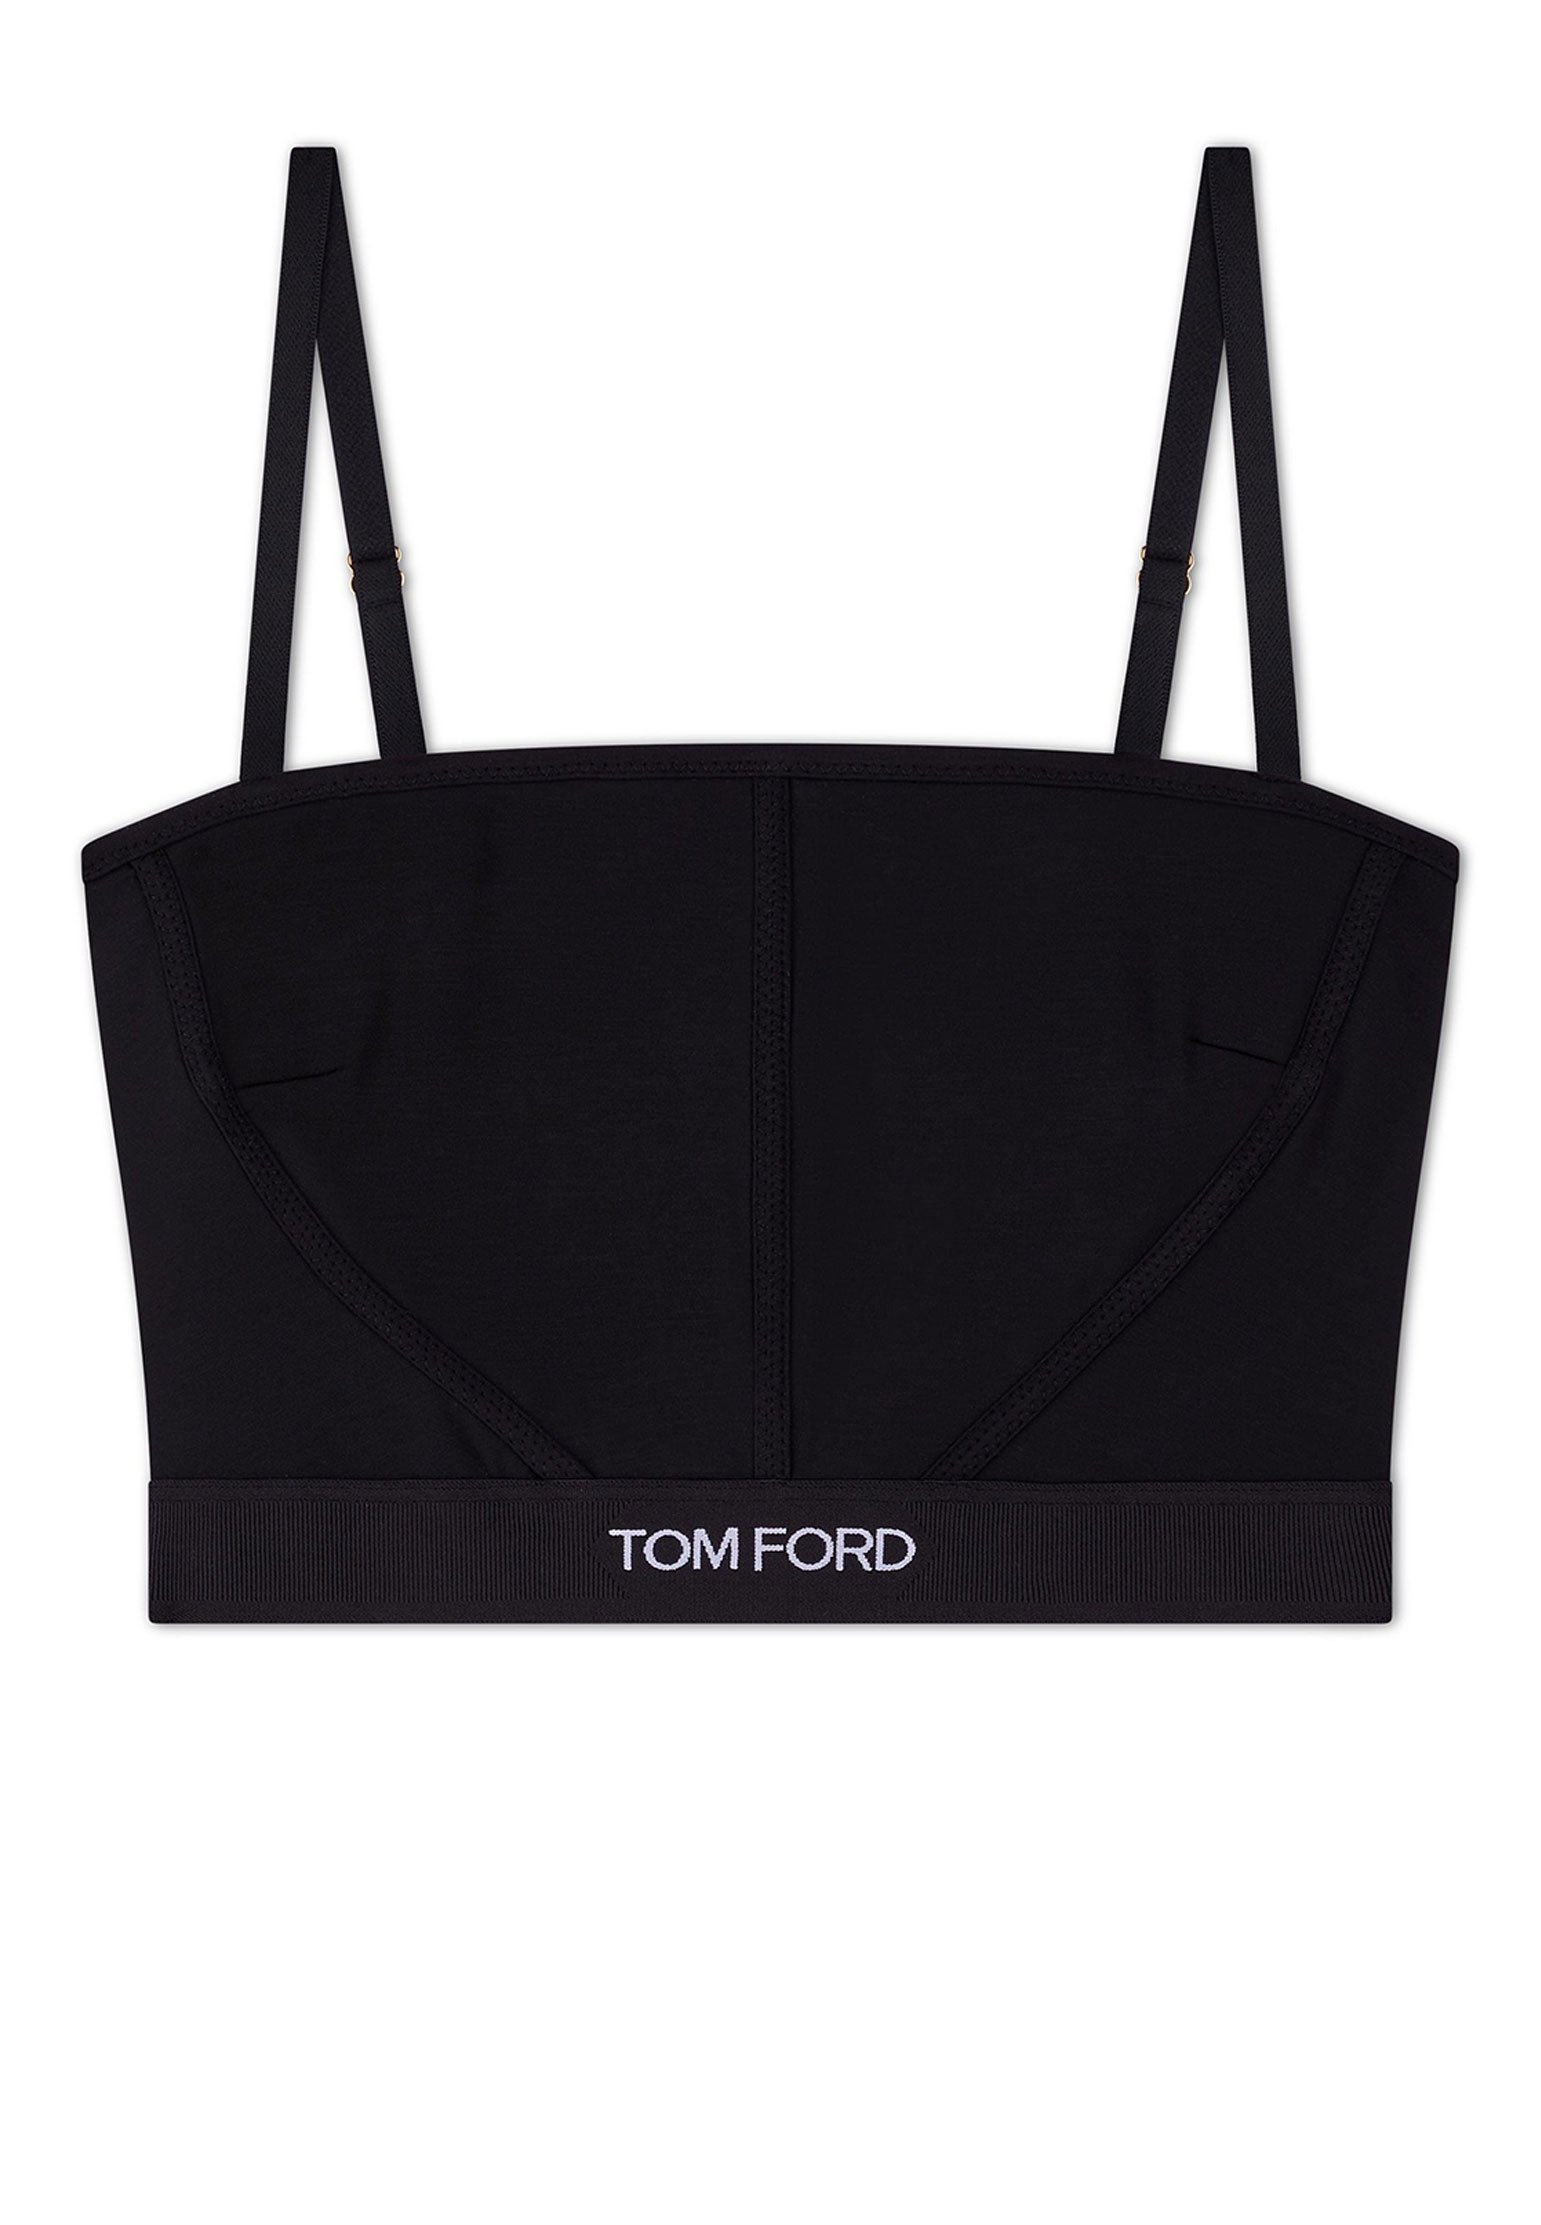 Top TOM FORD Color: black (Code: 2954) in online store Allure